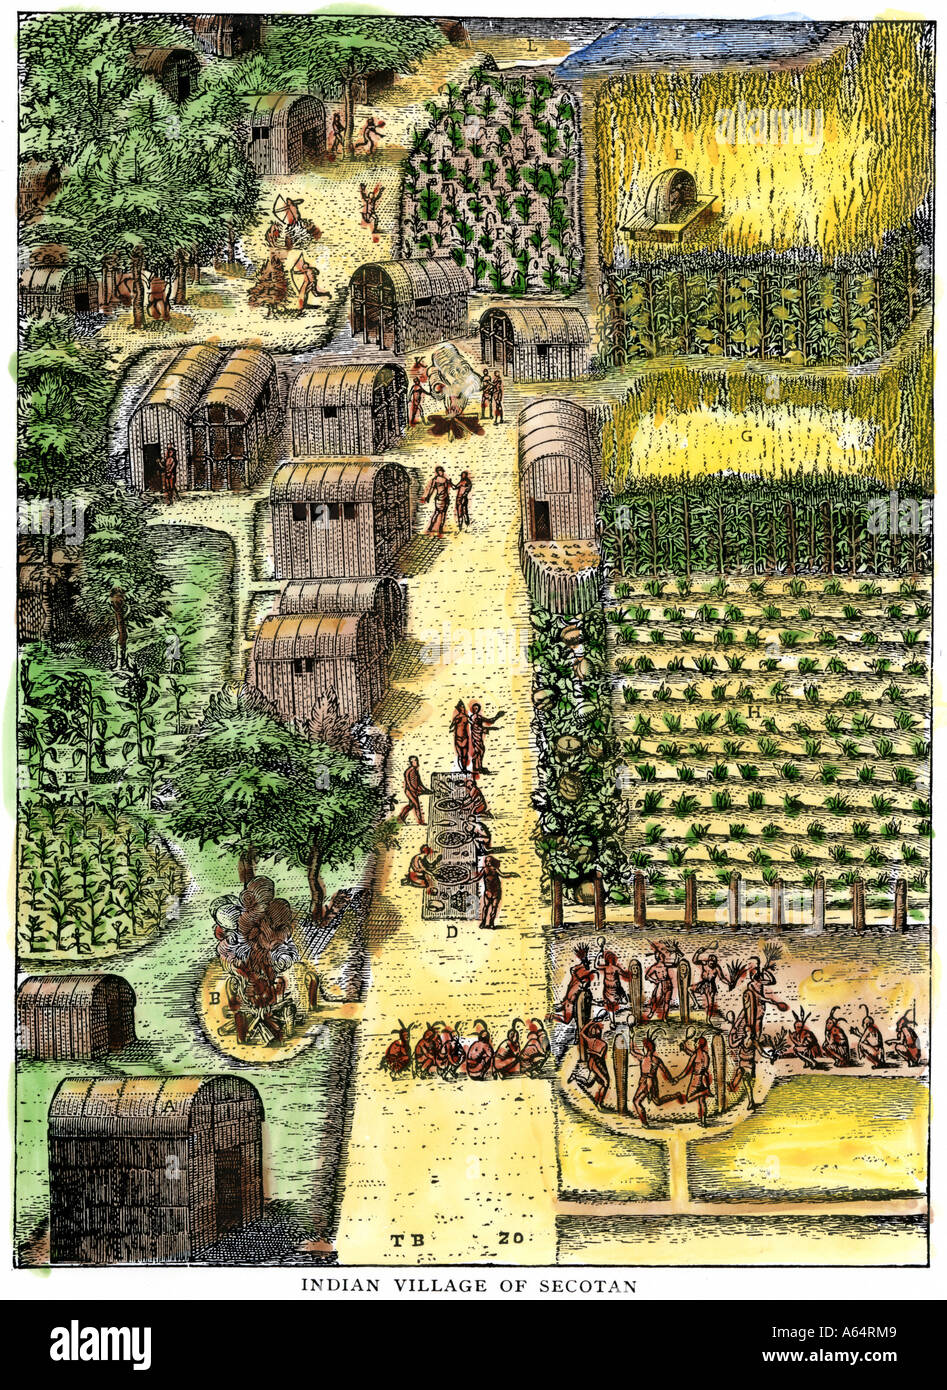 Native American village and gardens of Secotan in North Carolina then part of Virginia Colony 1500s. Hand-colored woodcut Stock Photo